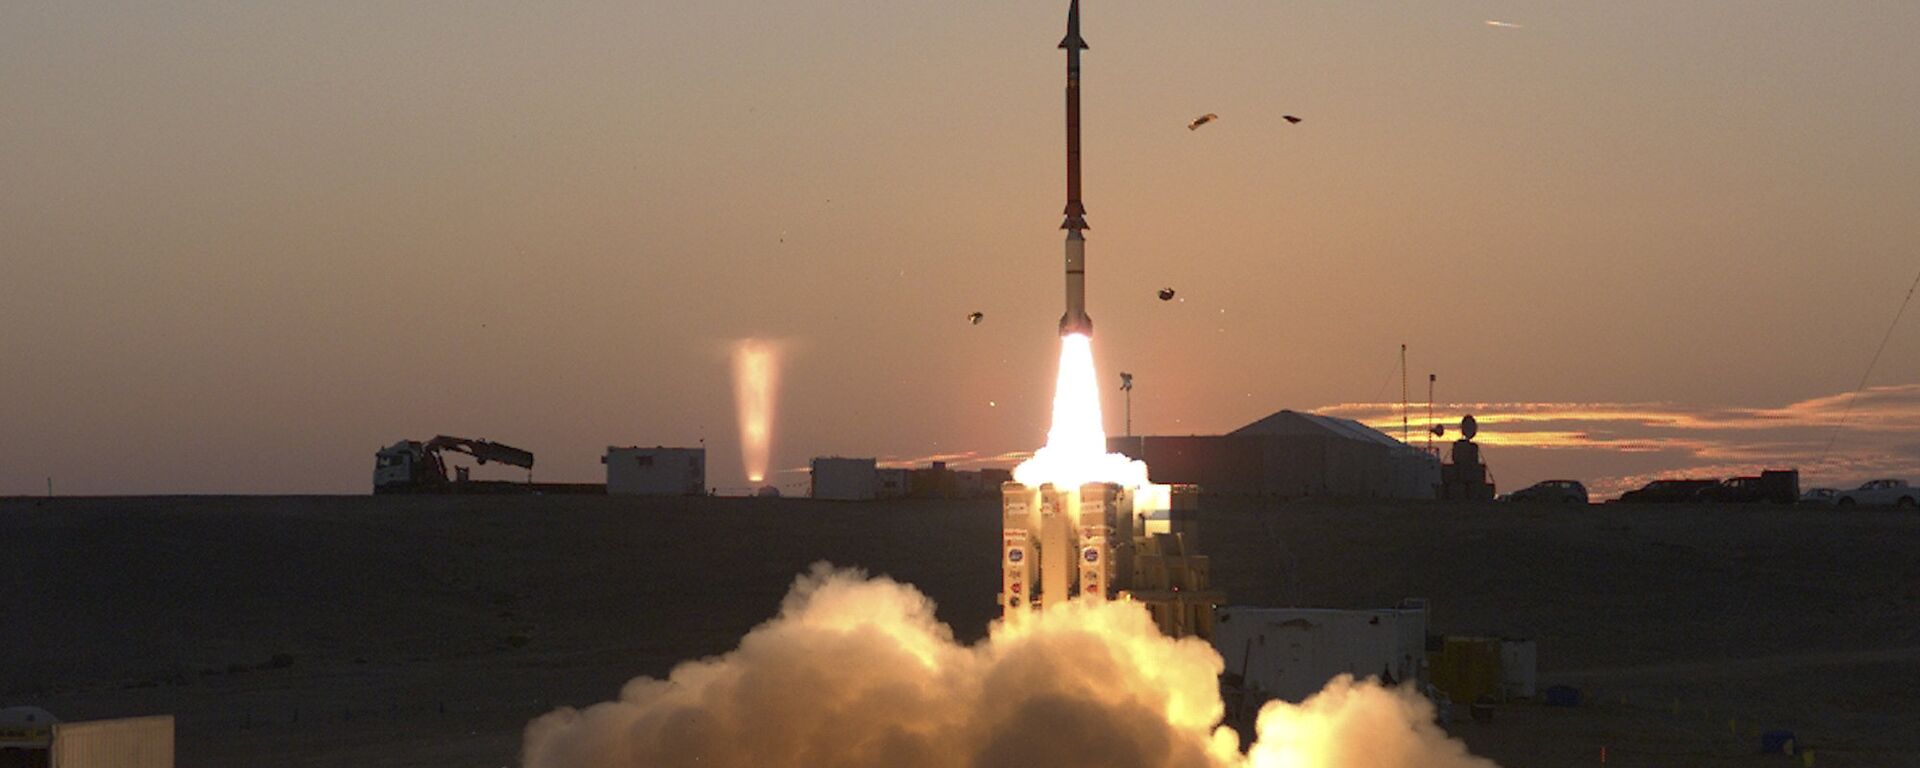 This photograph provided by the Israeli Ministry of Defense on Monday Dec. 21, 2015 shows a launch of David's Sling missile defense system. David's Sling is intended to counter medium-range missiles possessed by enemies throughout the region, most notably the Lebanese Shiite militant group Hezbollah.  - Sputnik International, 1920, 12.11.2023